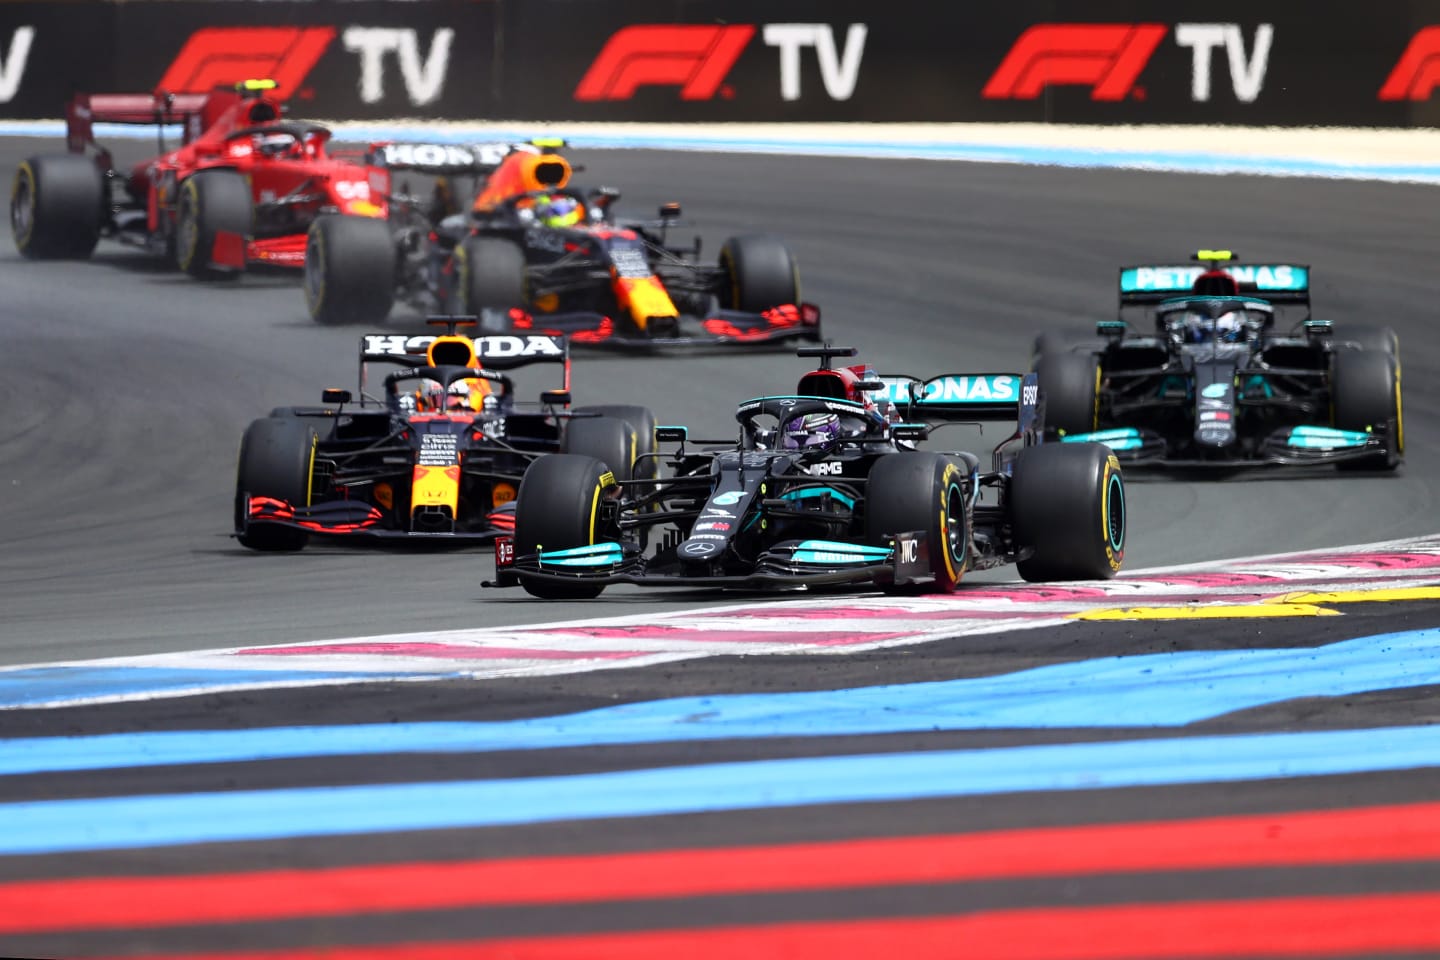 LE CASTELLET, FRANCE - JUNE 20: Lewis Hamilton of Great Britain driving the (44) Mercedes AMG Petronas F1 Team Mercedes W12 leads Max Verstappen of the Netherlands driving the (33) Red Bull Racing RB16B Honda and the rest of the field at the start of the race during the F1 Grand Prix of France at Circuit Paul Ricard on June 20, 2021 in Le Castellet, France. (Photo by Dan Istitene - Formula 1/Formula 1 via Getty Images)